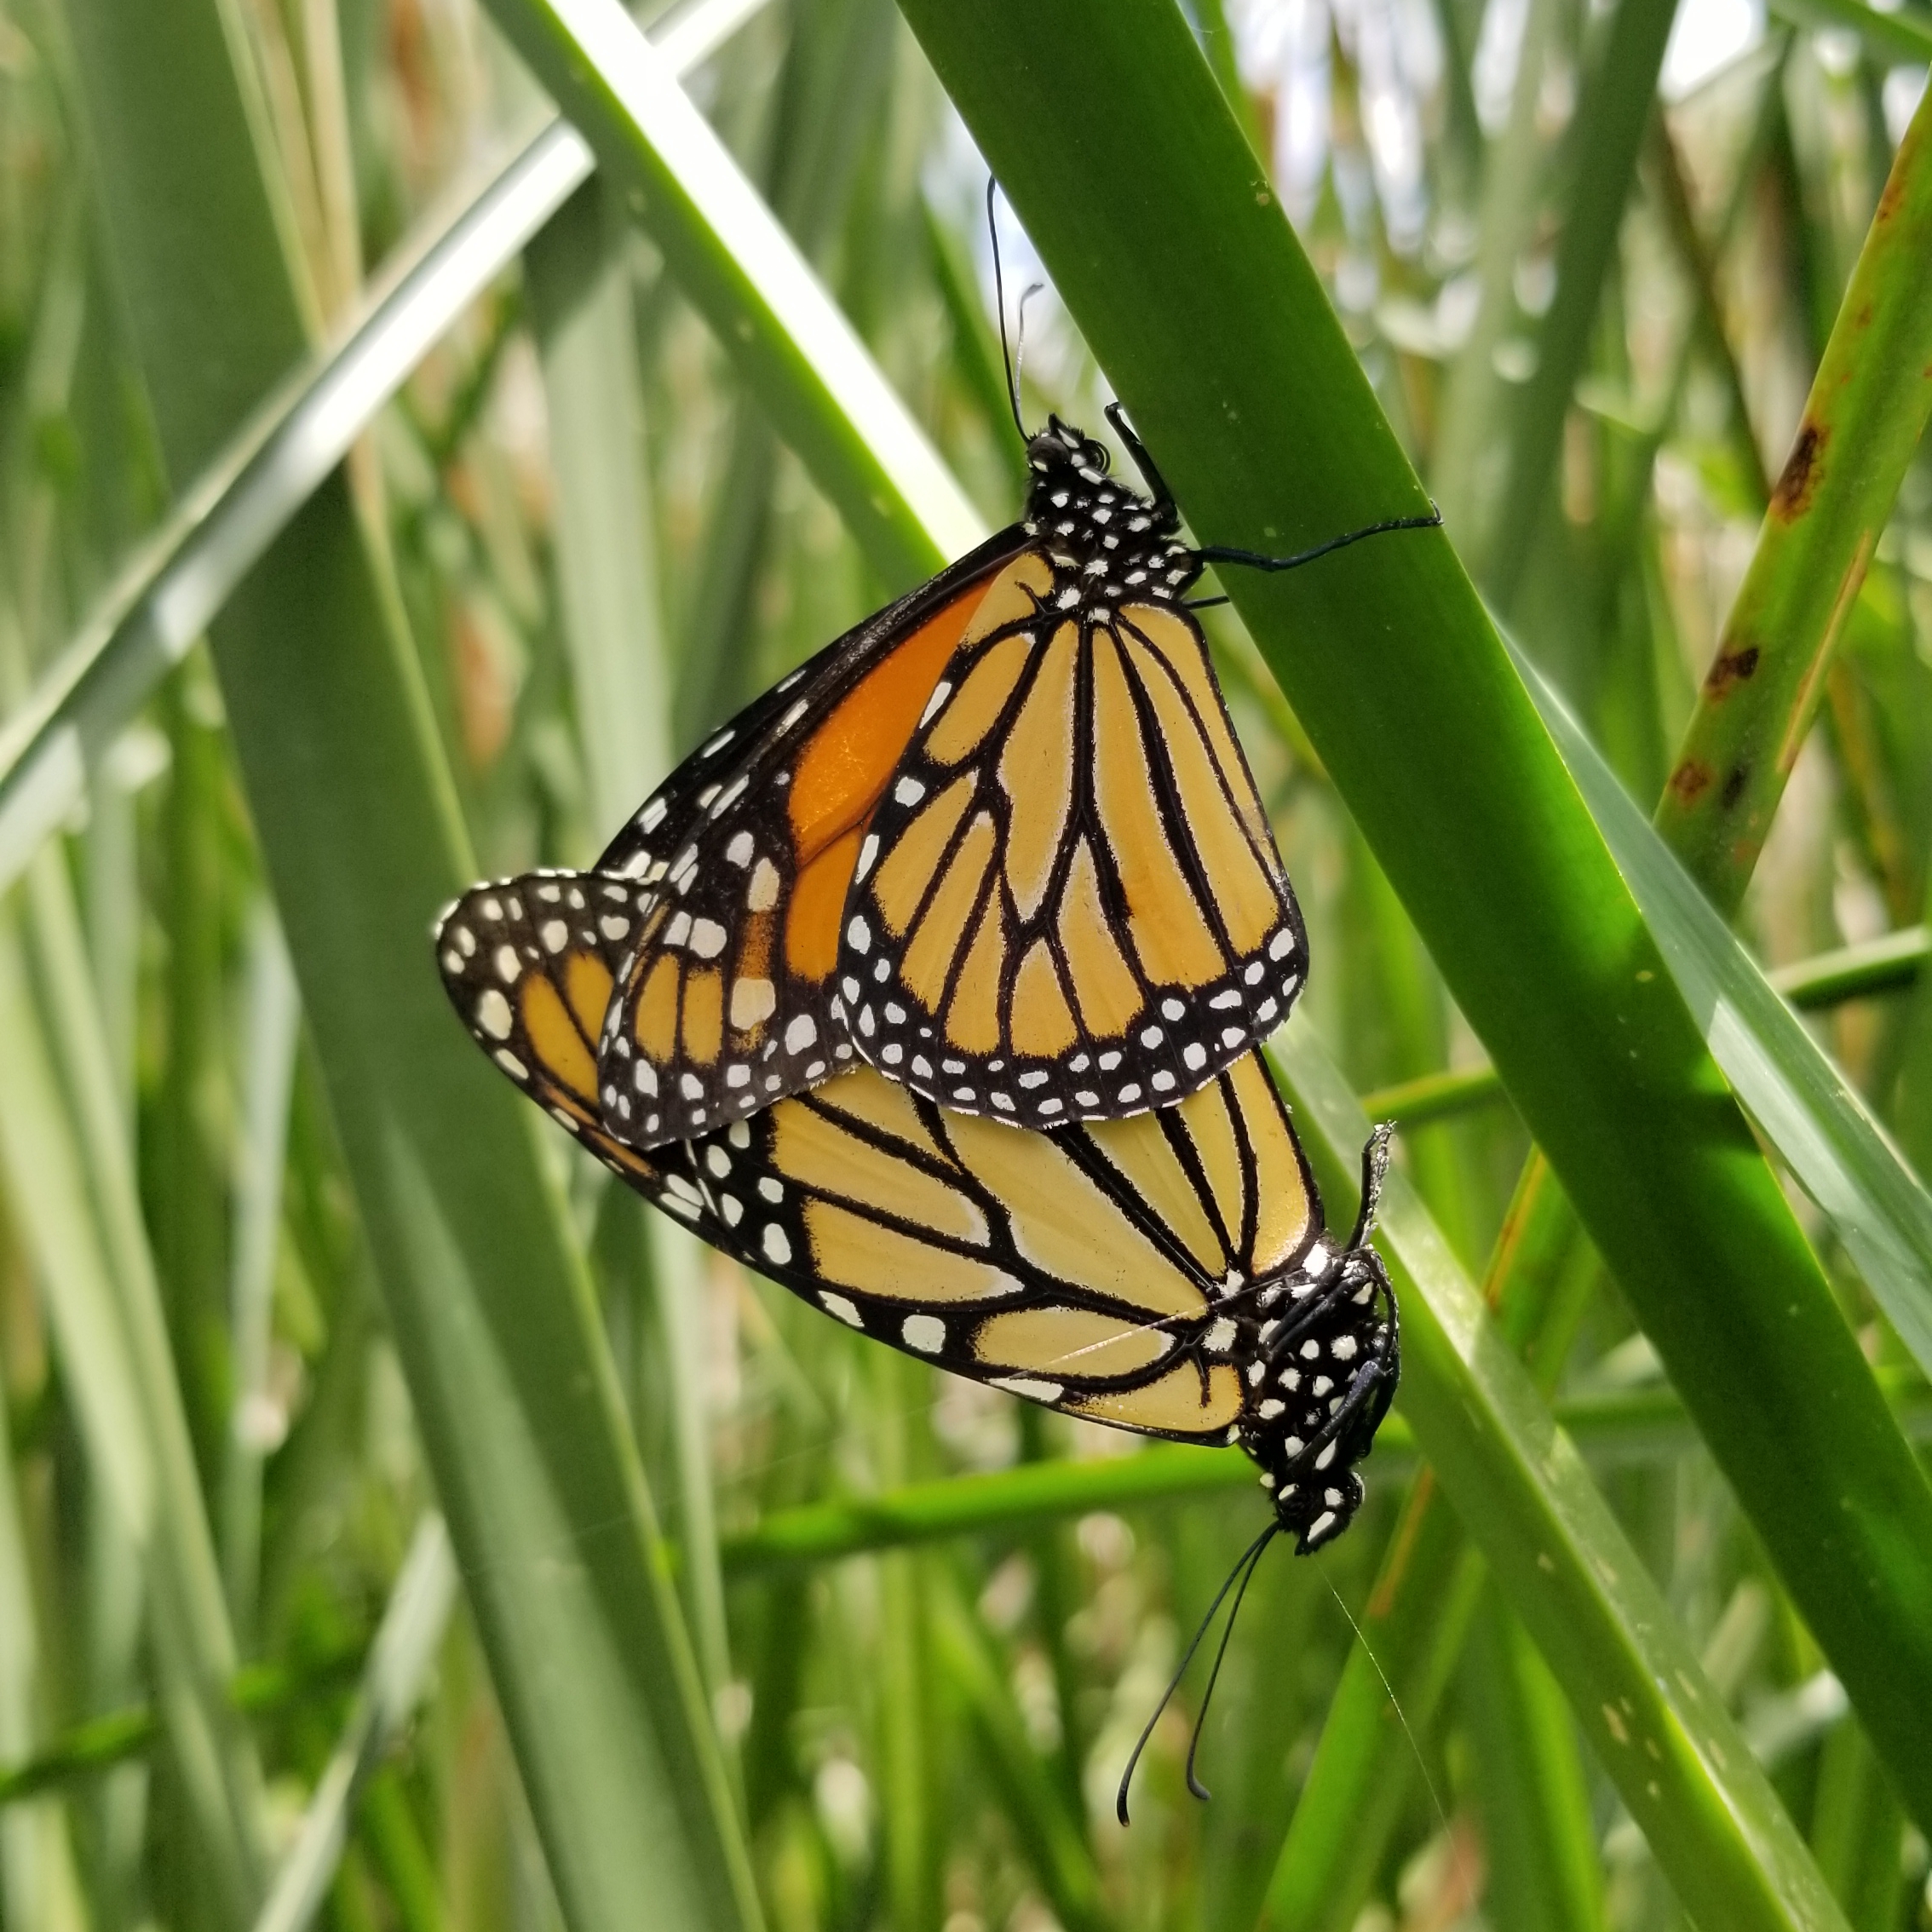 Two monarchs' wings entwine a bit as they stand rear-to-rear, mating on a leaf.